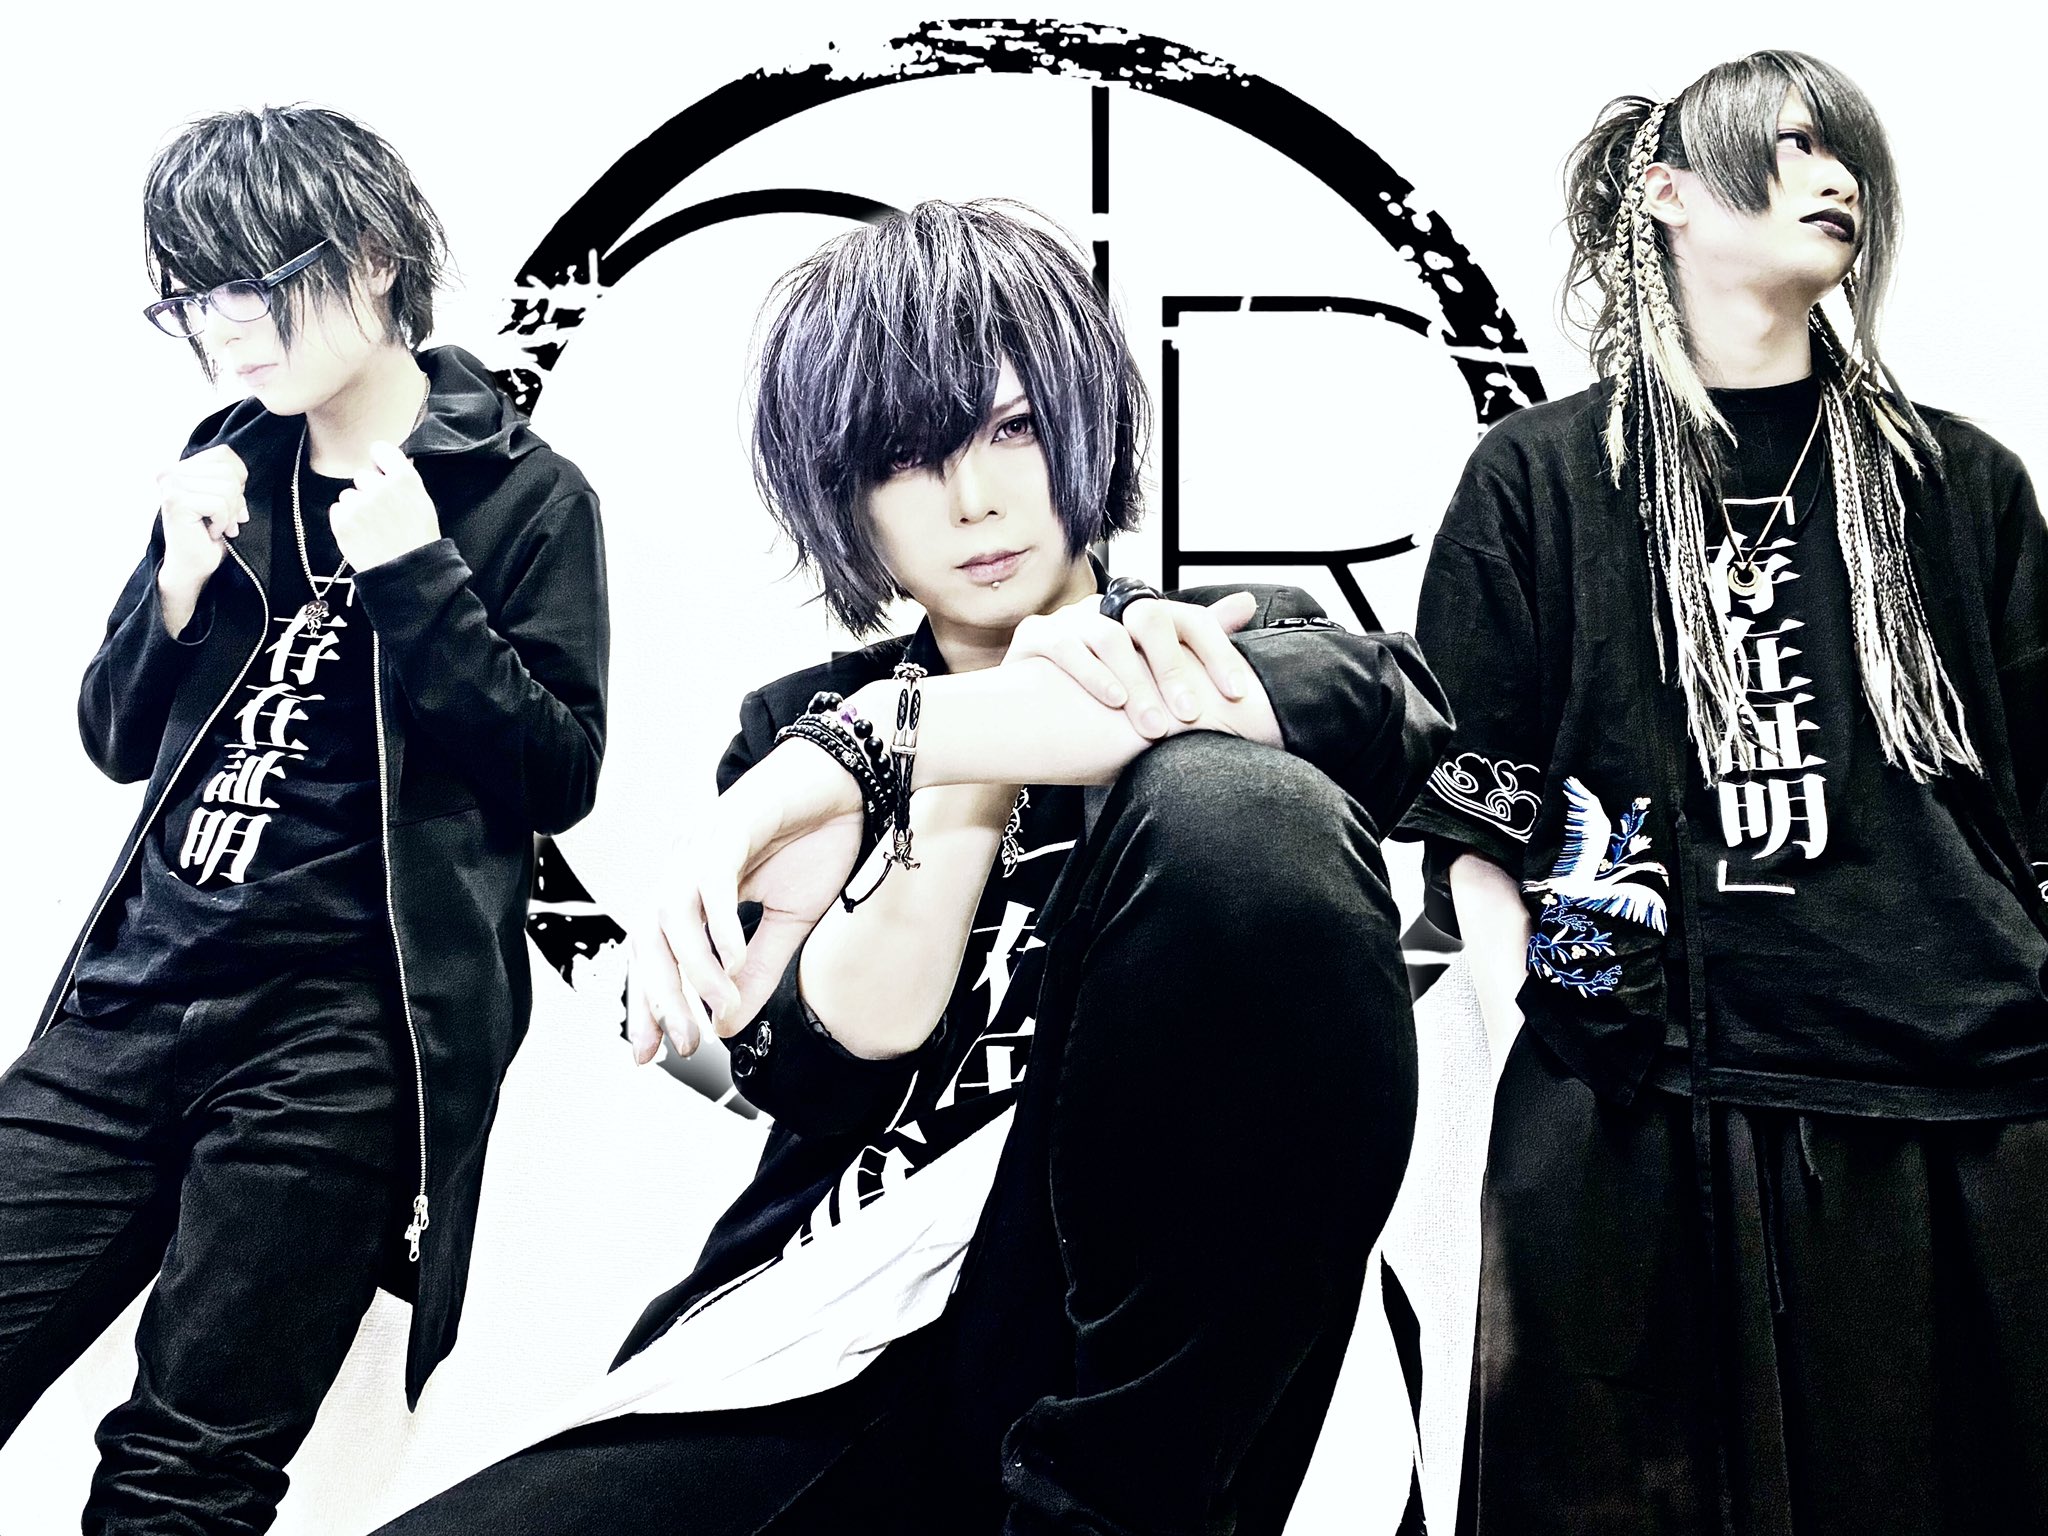 GLORIA – New guitarist and new look